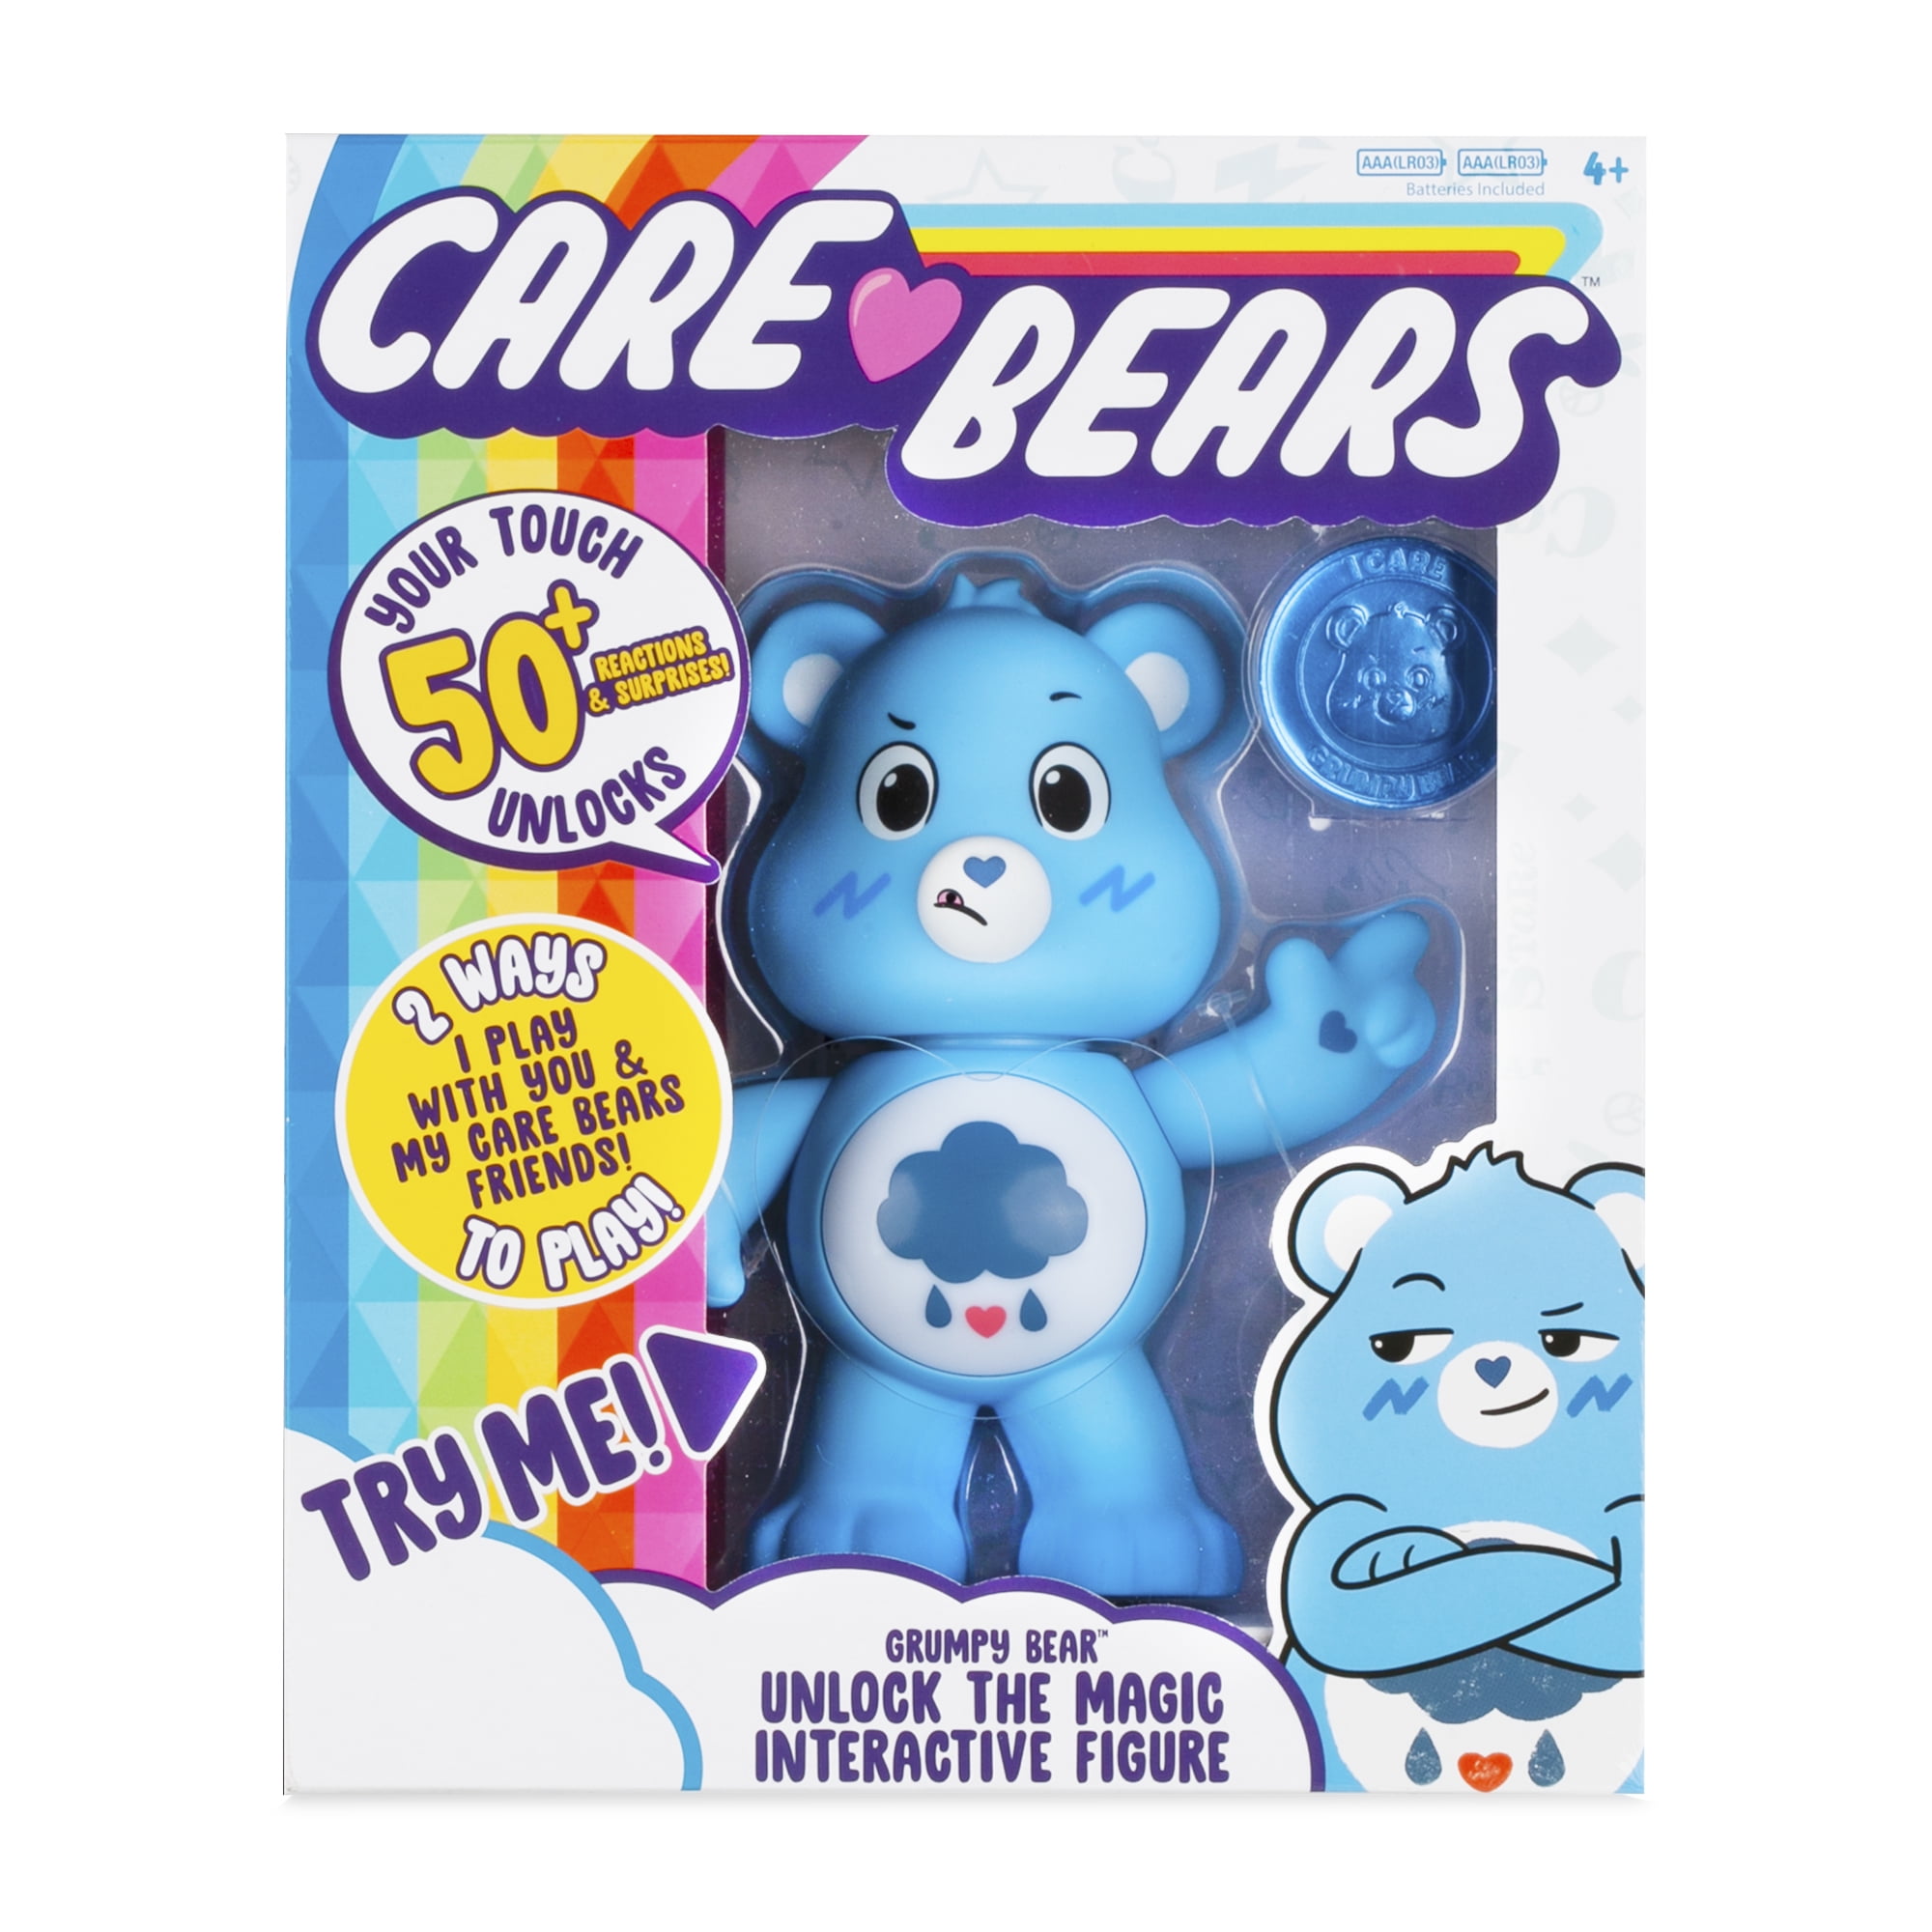 New with box Care Bears 5 inches Interactive Figure Cheer Bear 